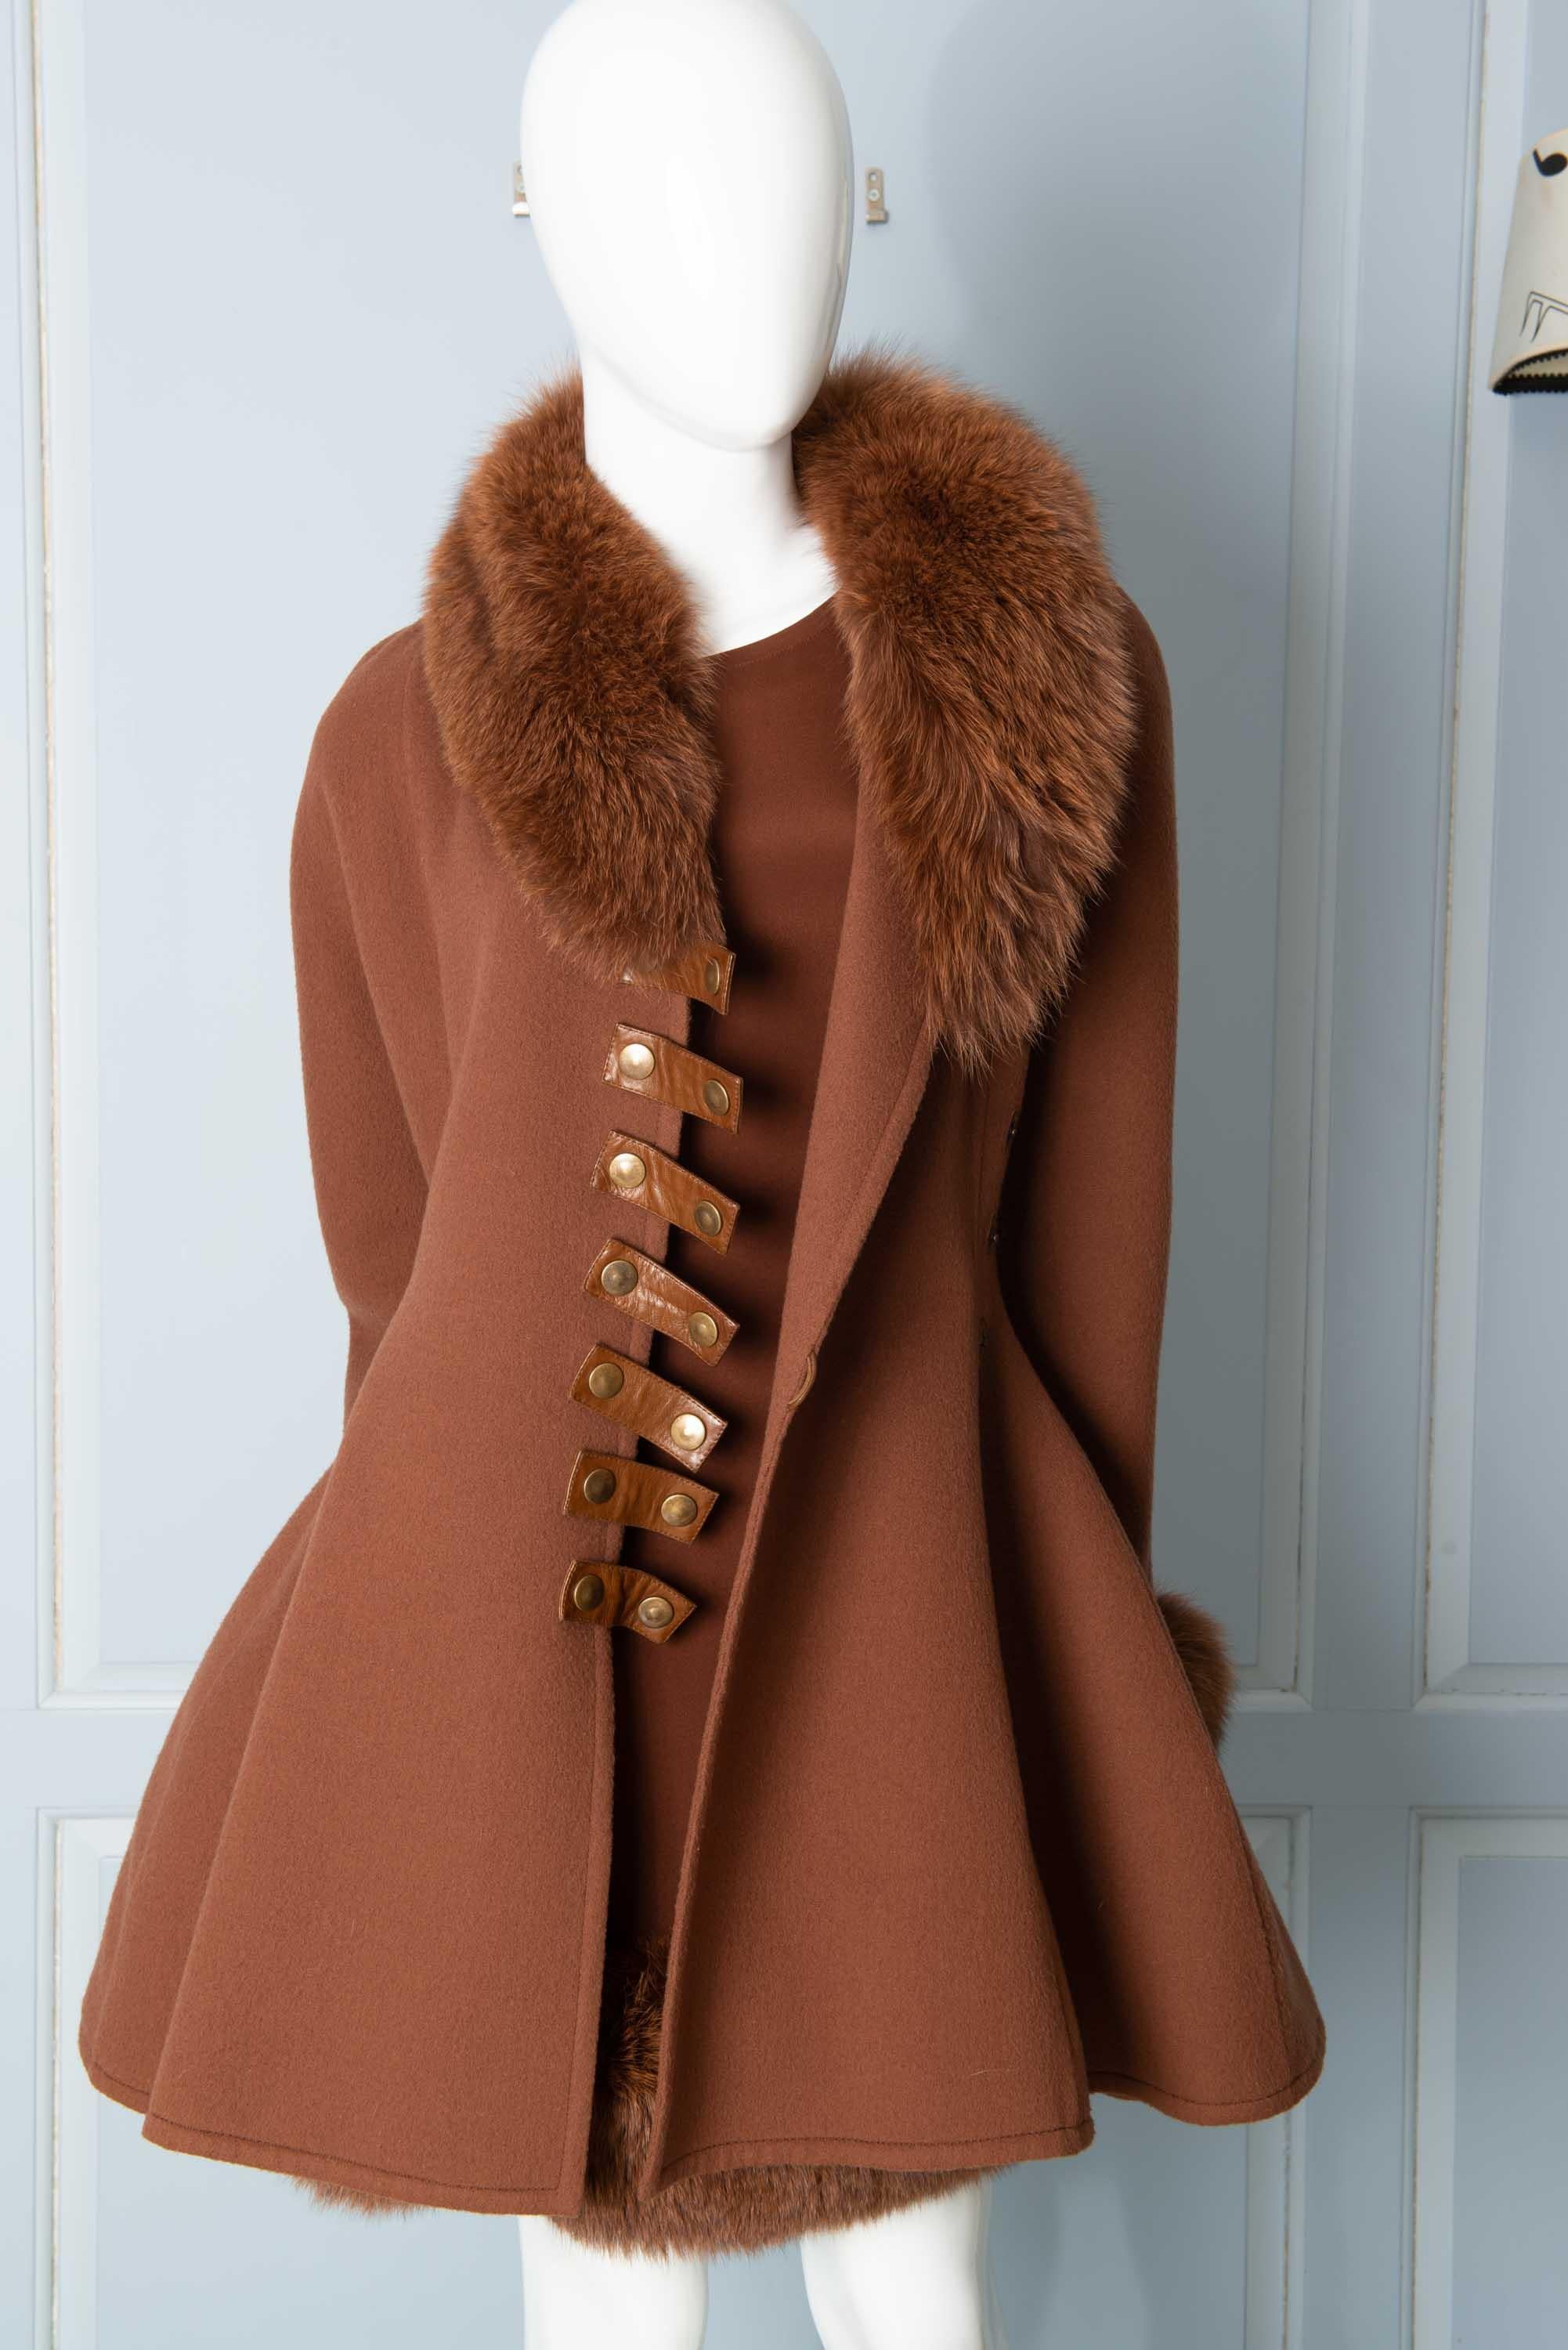 Haute Couture. Spectacular and timeless style. Similar to Christian Dior new look with the fitted waist and voluminous skirt of the coat. Also similar to Alaia skirt fullness. Cashmere coat has fox fur collar and cuffs. Silk dress has fox fur hem.